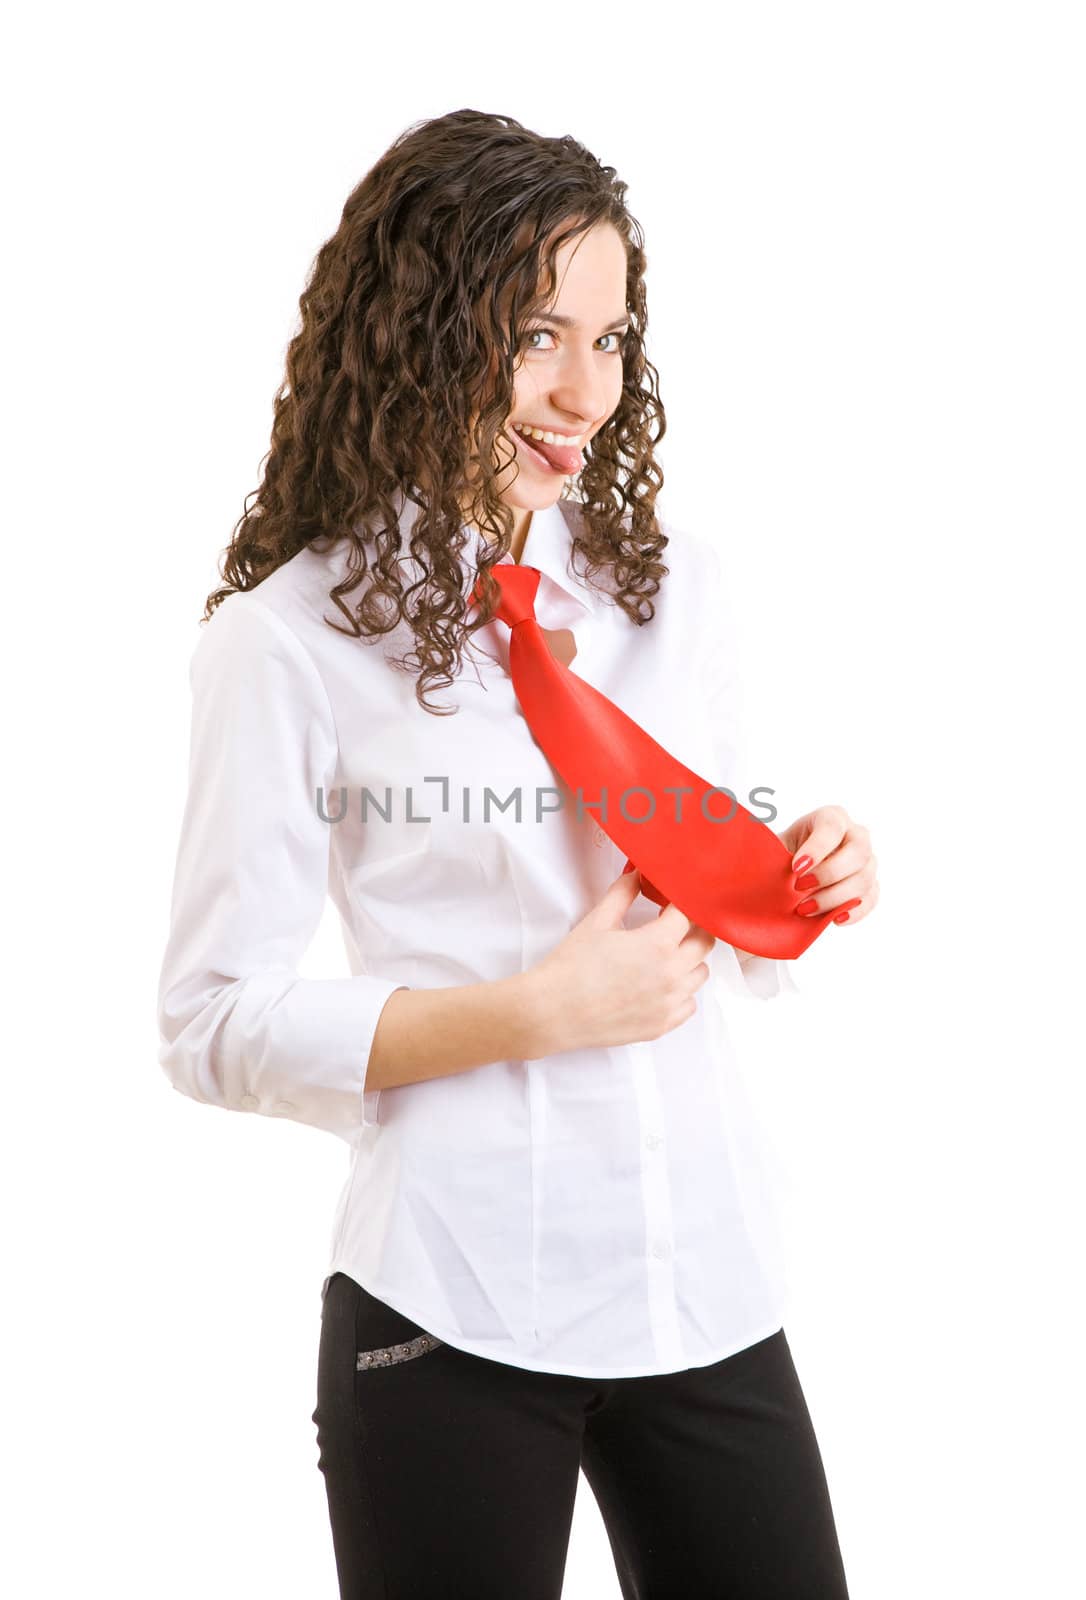 girl playes eith her tie and sticks her tongue out